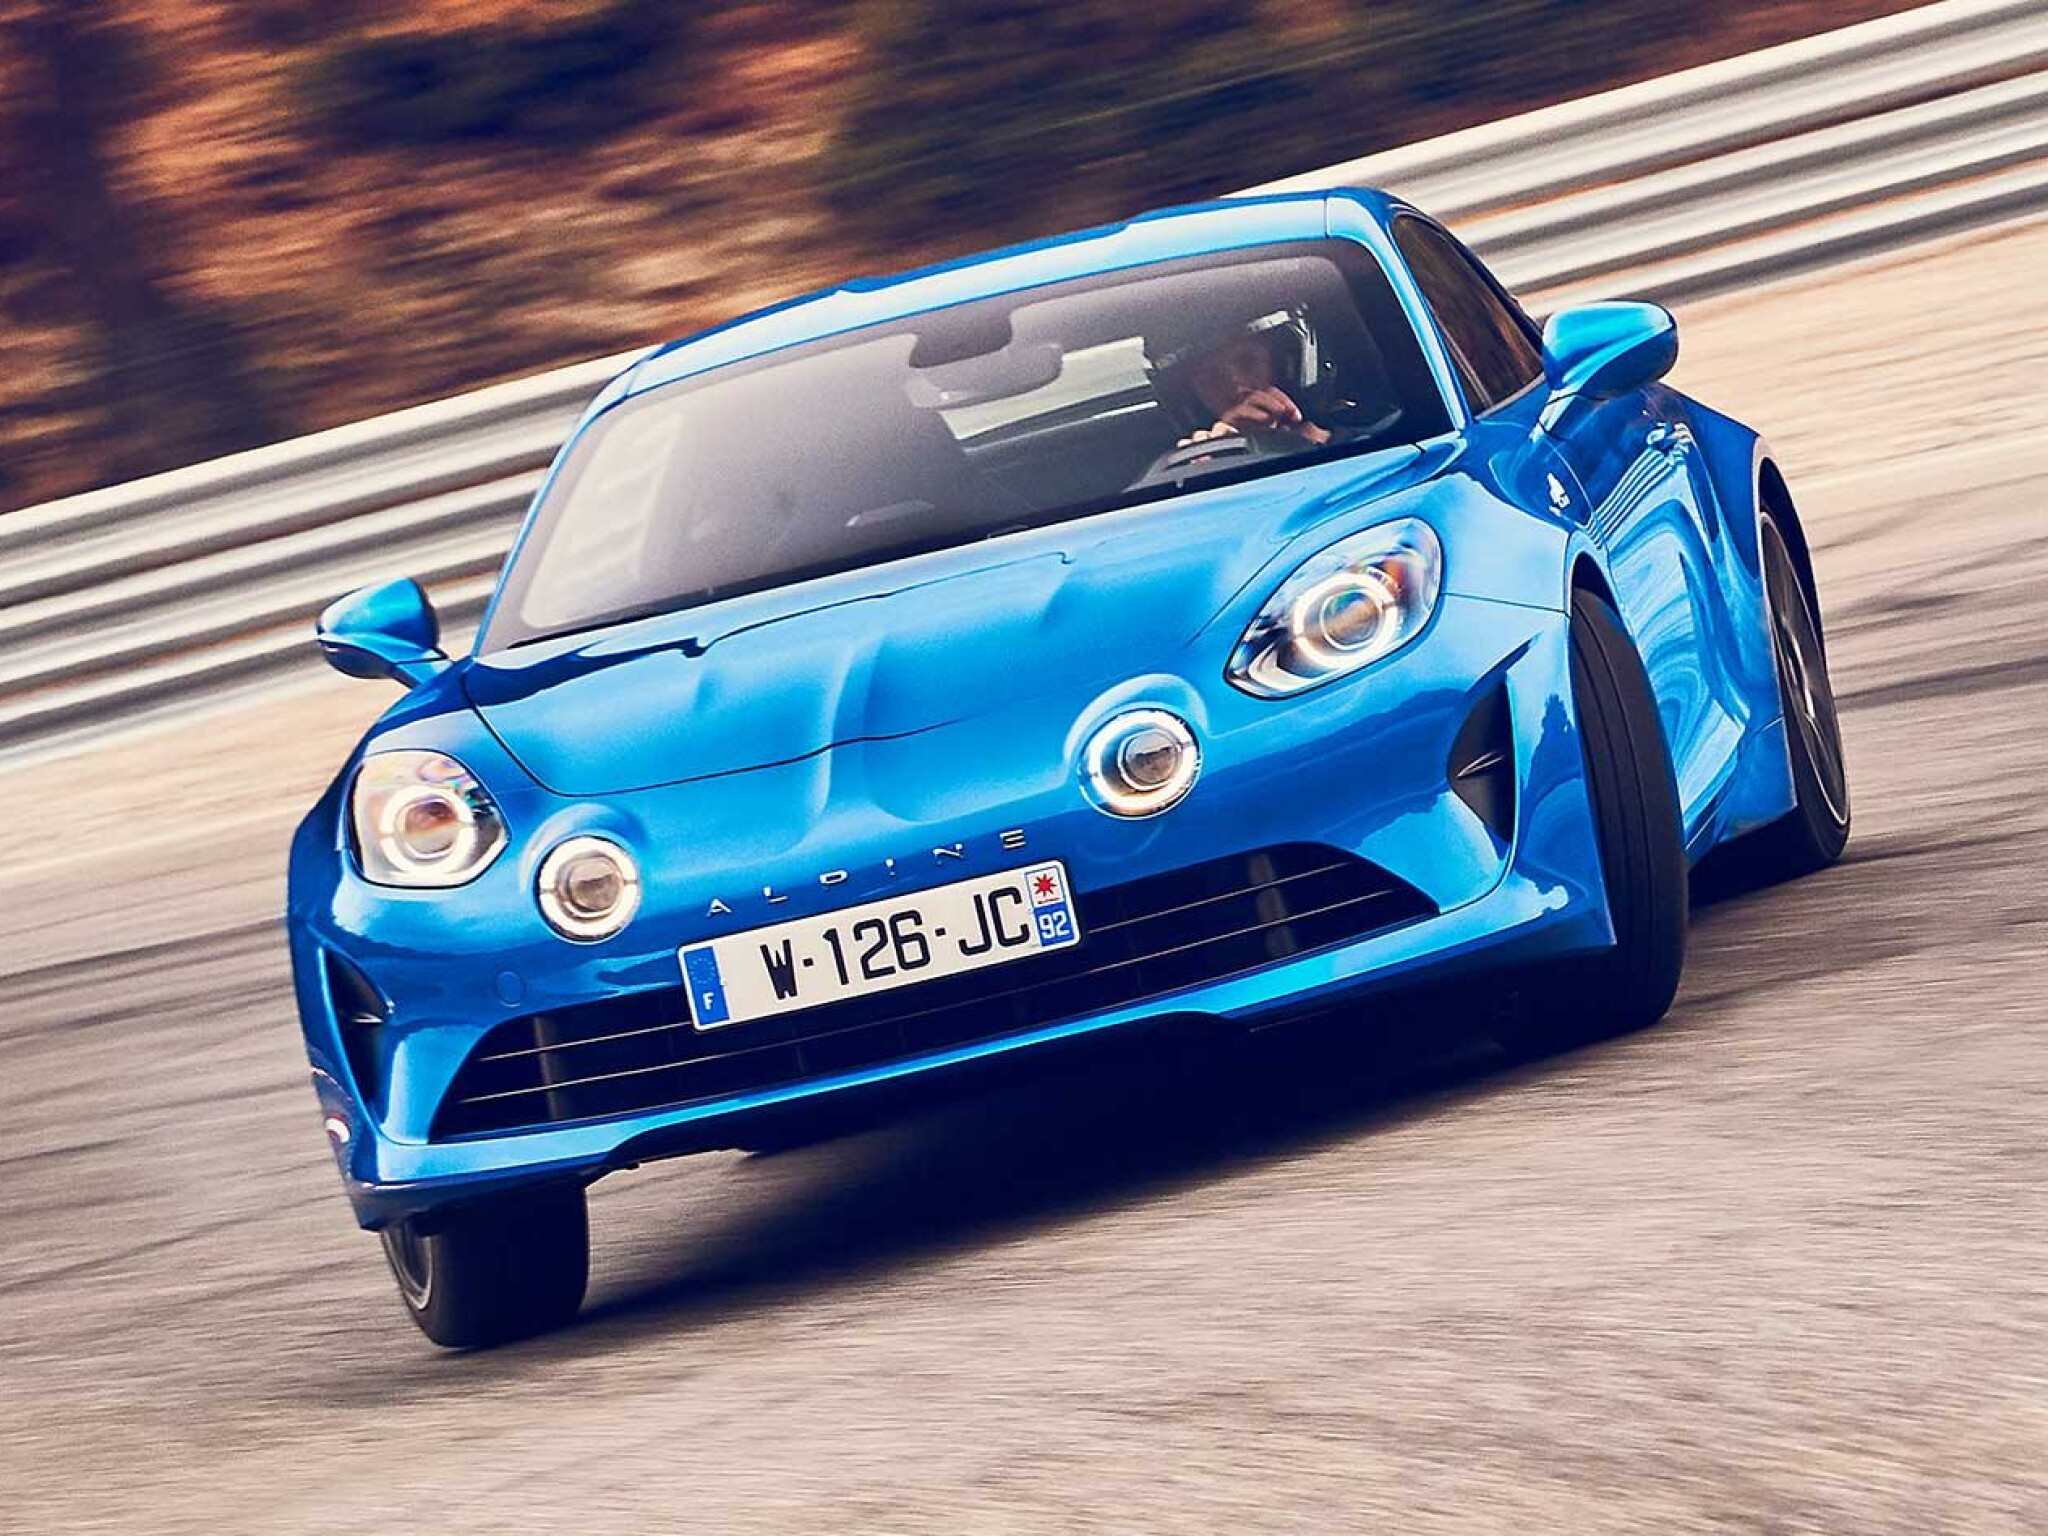 Alpine, Renault Revives Production of Sports Car After 40-Year Hiatus